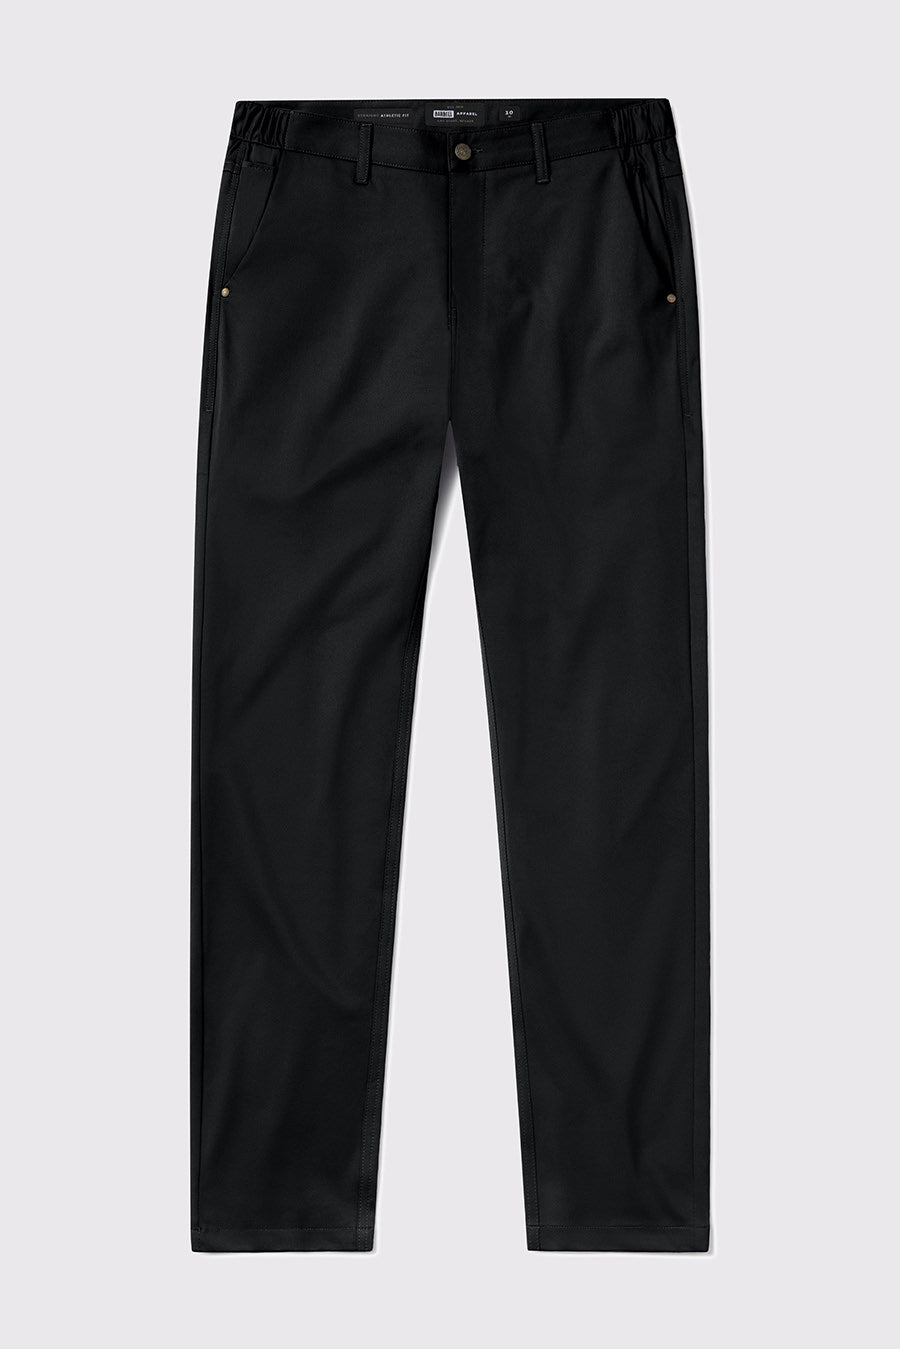 Anything Dress Pant - Black - photo from front flat lay #color_black